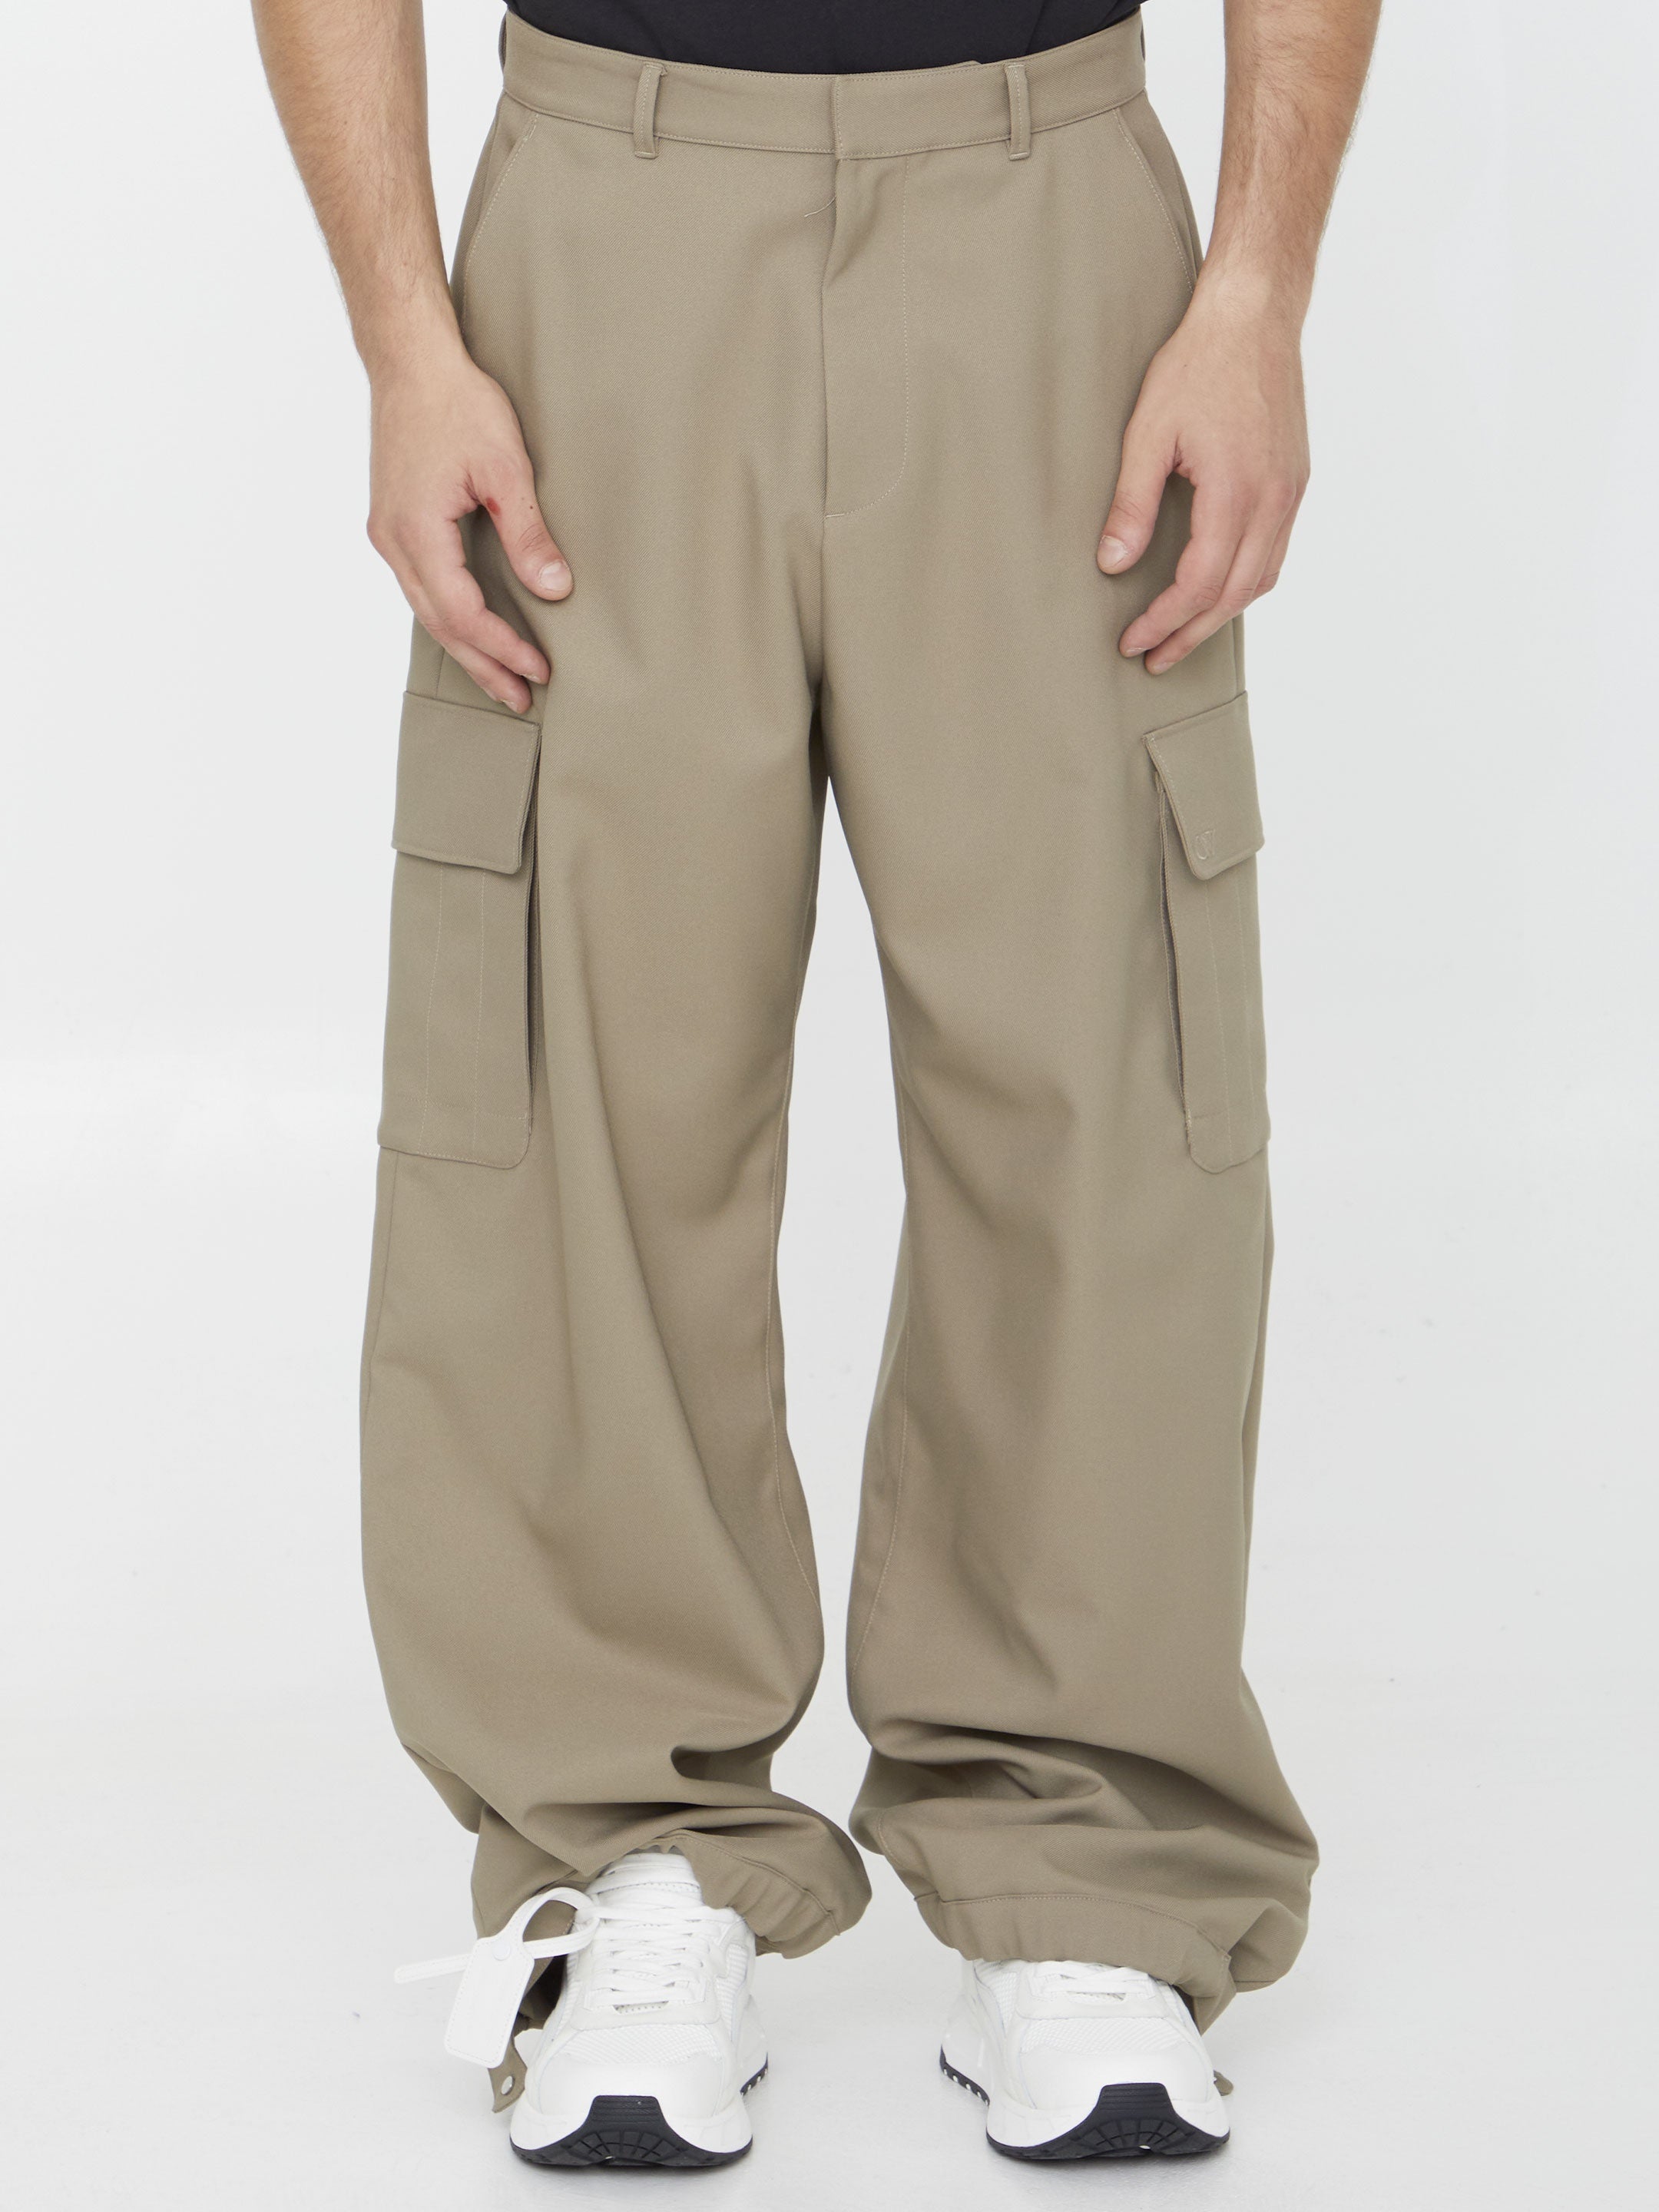 OFF-WHITE-OUTLET-SALE-OW-Emb-Drill-Cargo-pants-Hosen-46-BEIGE-ARCHIVE-COLLECTION.jpg